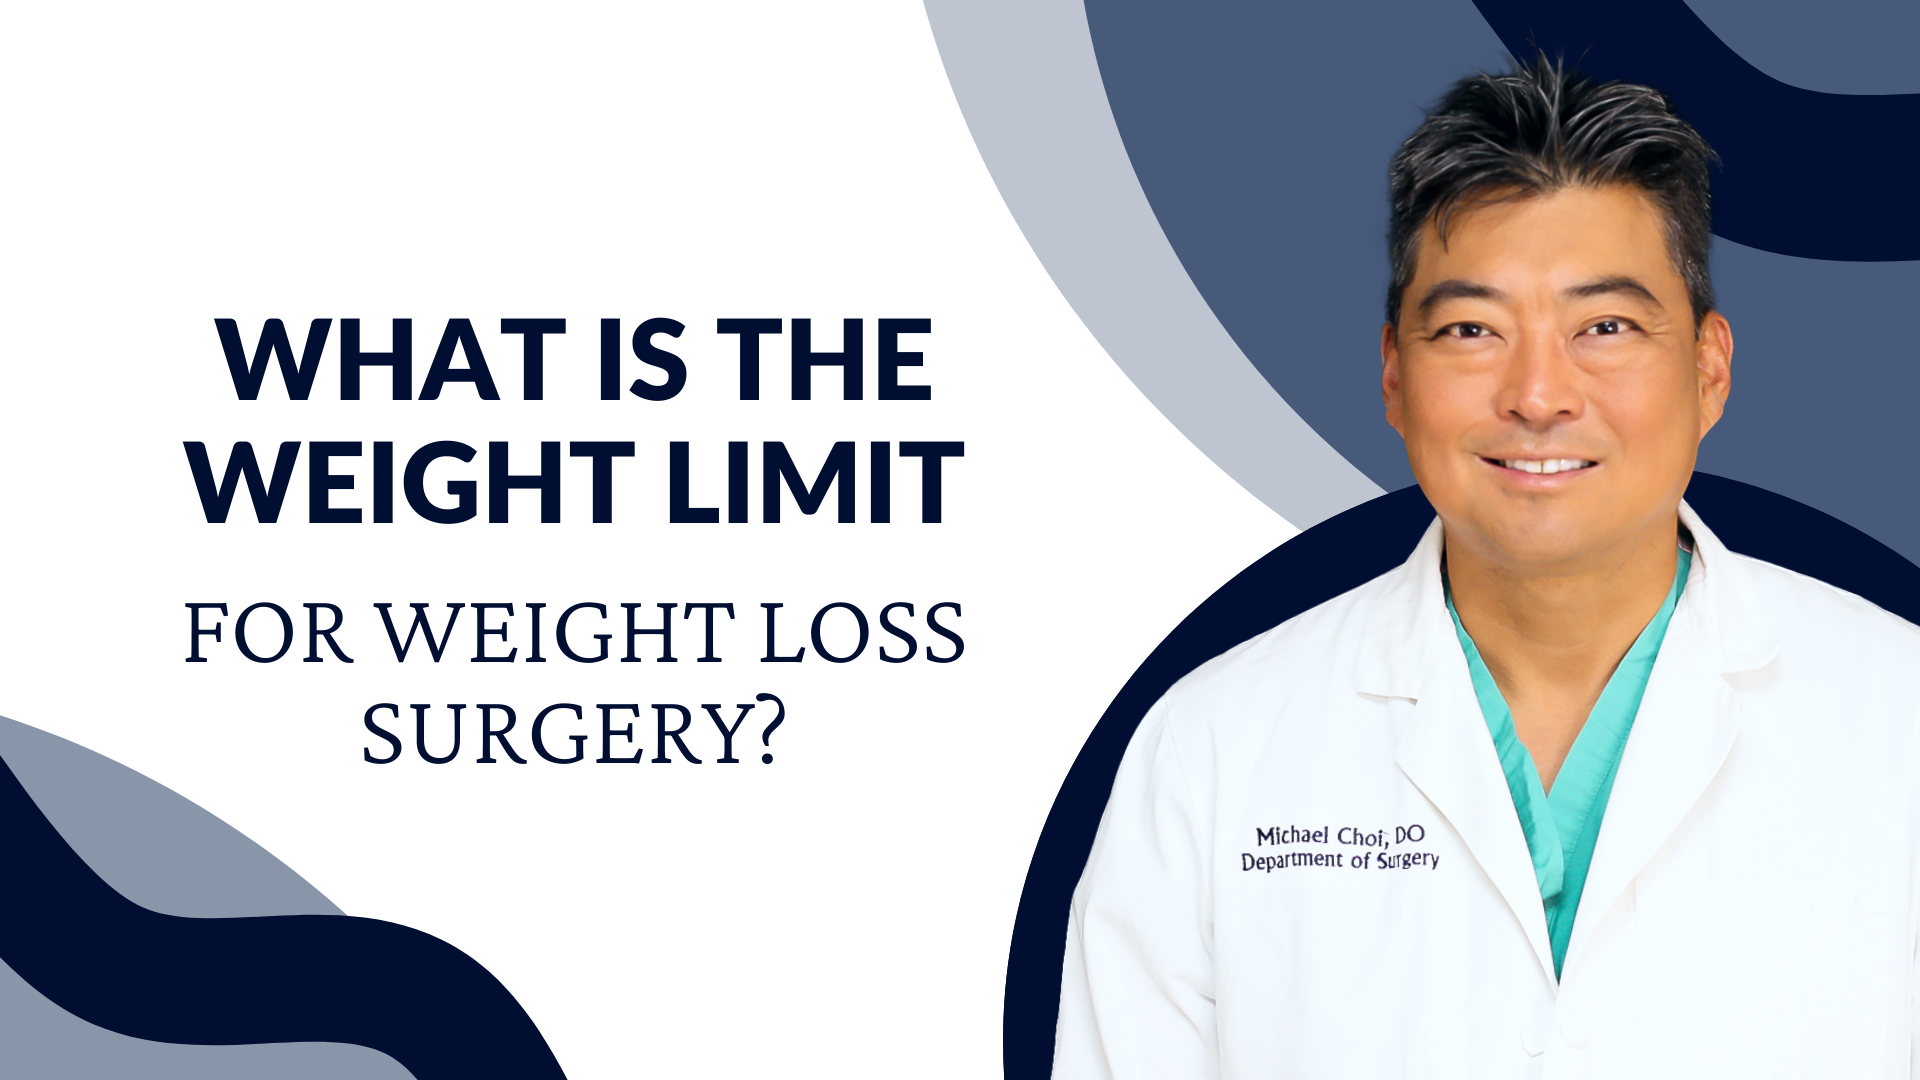 What Is the Weight Limit for Weight Loss Surgery